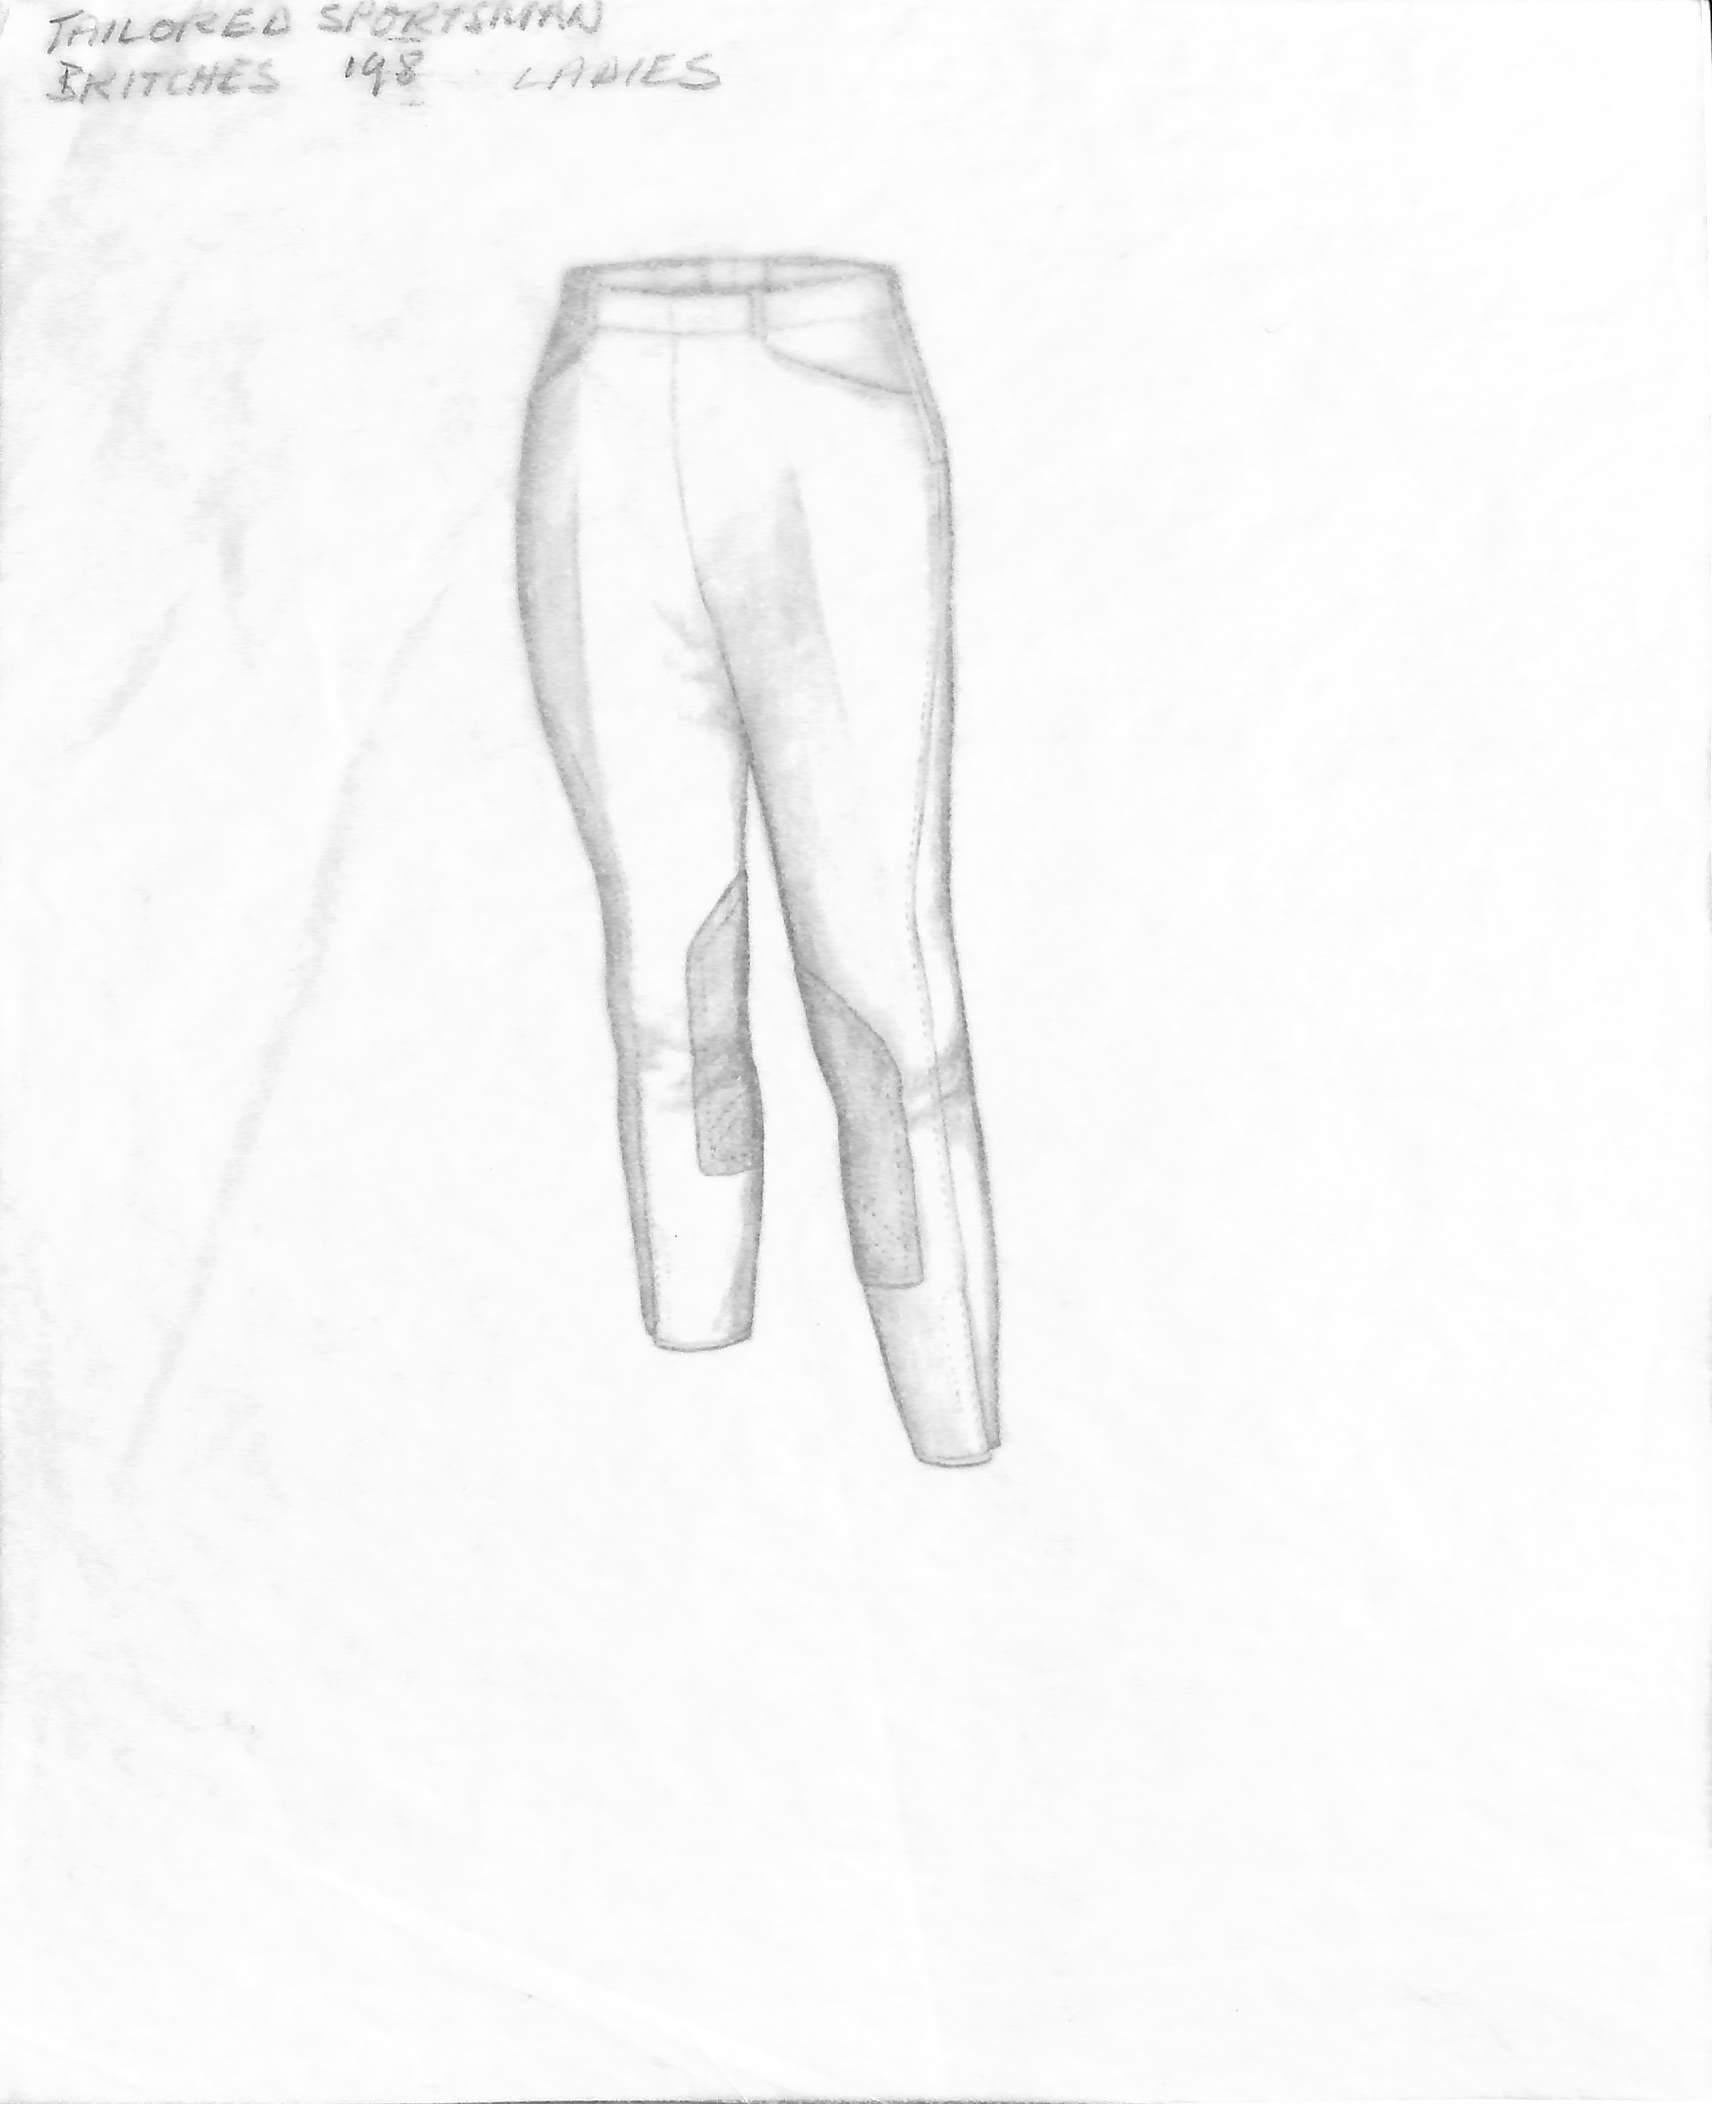 Tailored Sportsman Britches Graphite Drawing - Art by Unknown